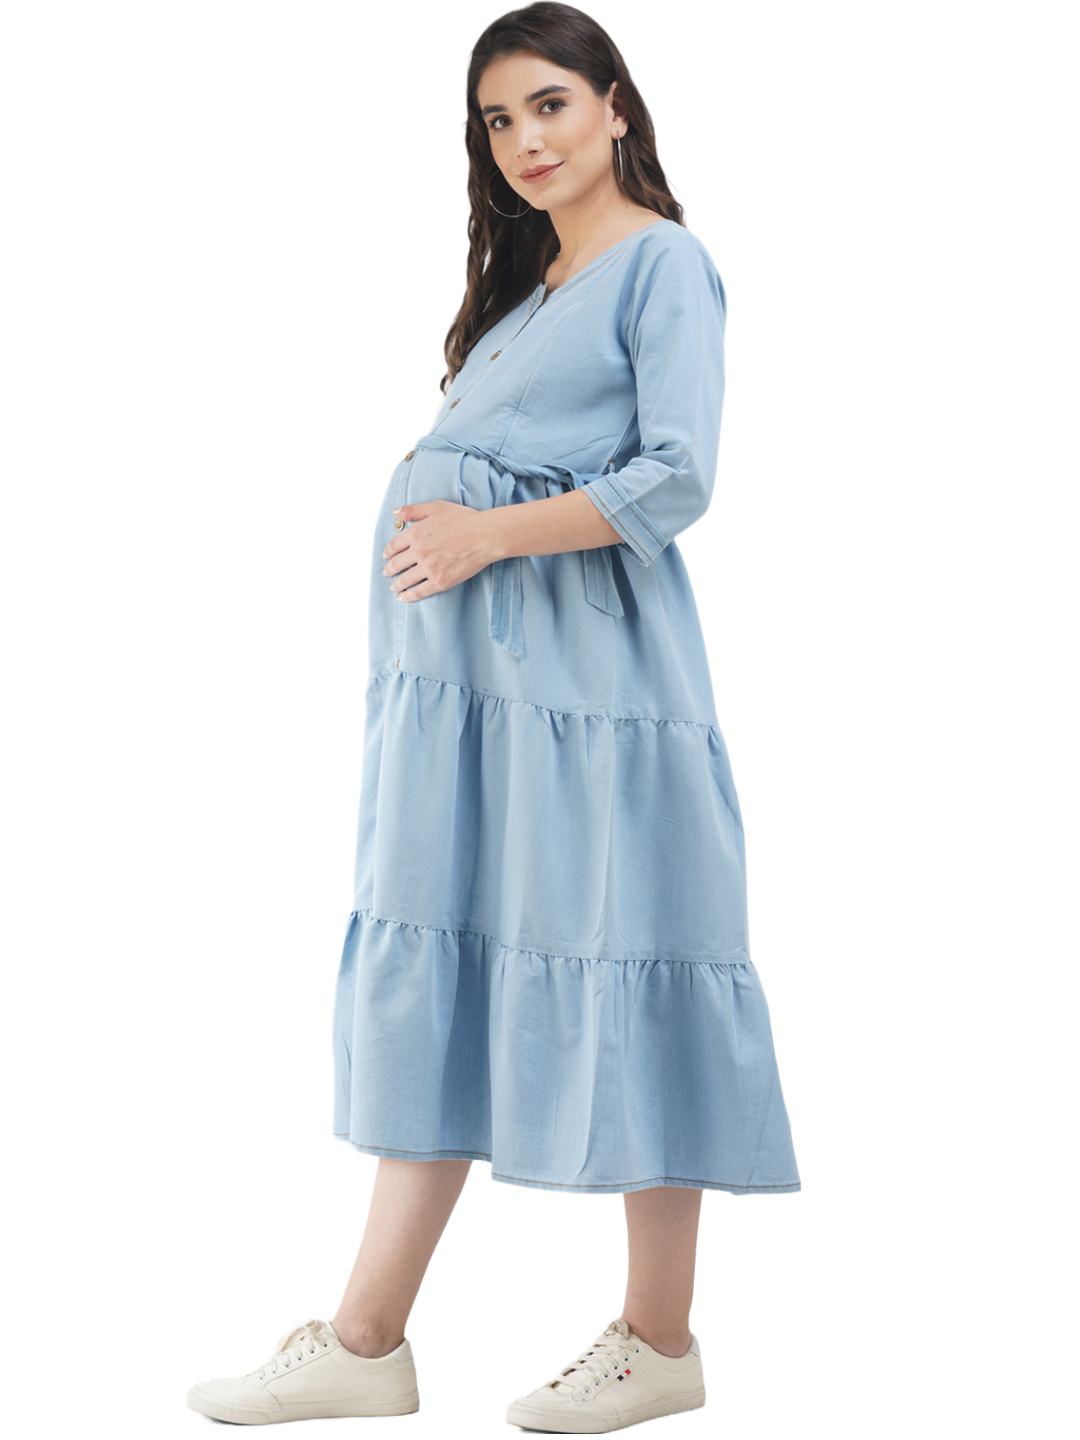 Denim Maternity dress with Gold Button